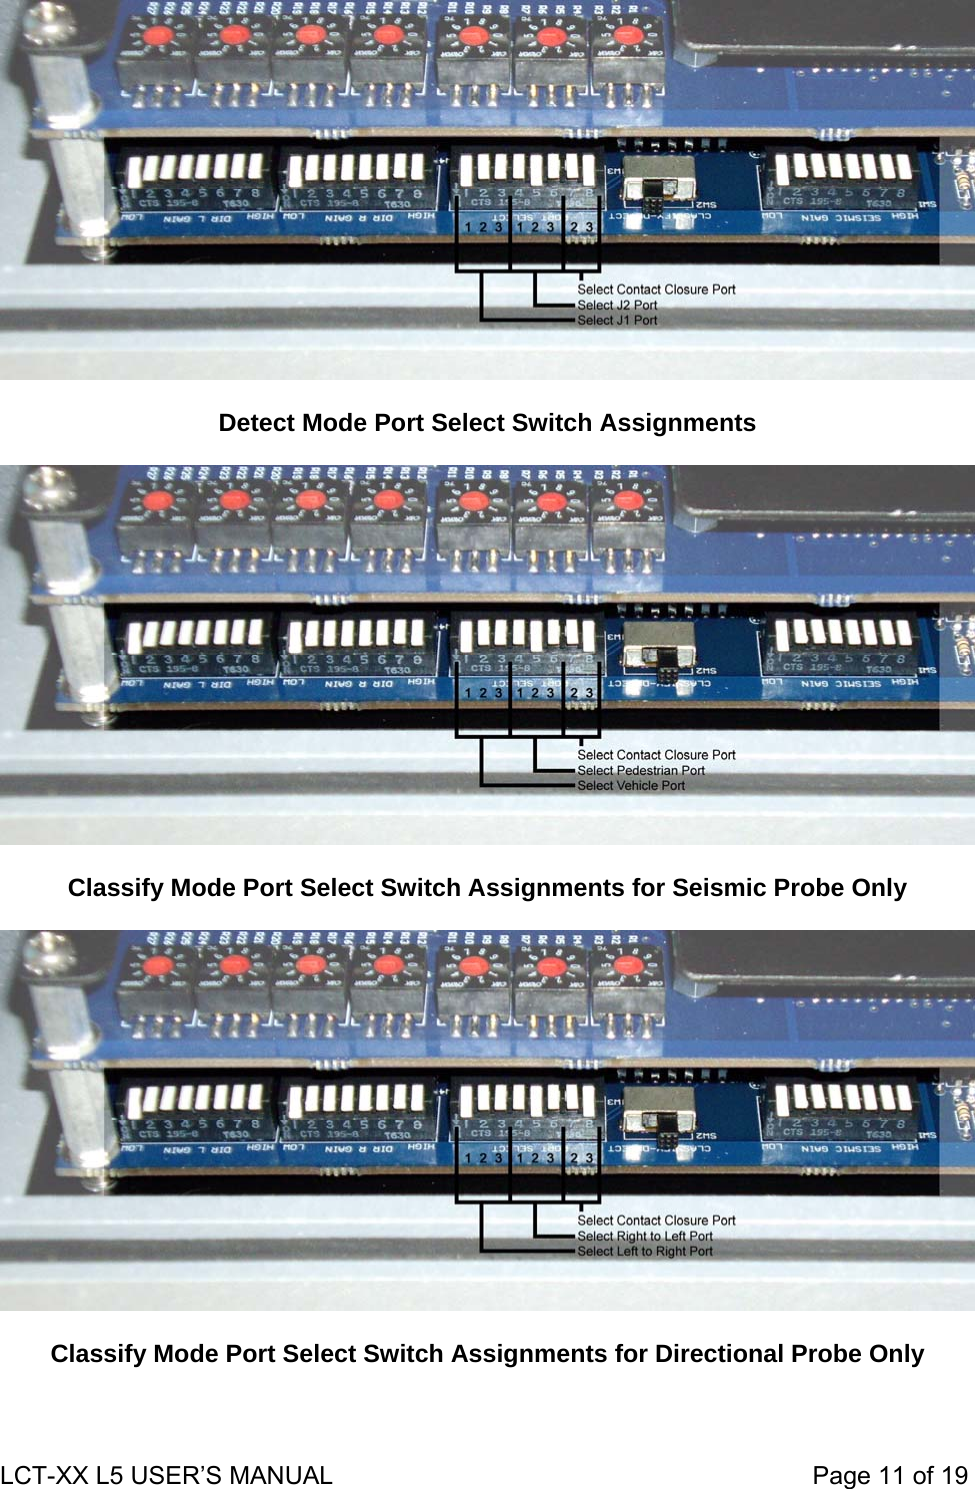   Detect Mode Port Select Switch Assignments    Classify Mode Port Select Switch Assignments for Seismic Probe Only    Classify Mode Port Select Switch Assignments for Directional Probe Only  LCT-XX L5 USER’S MANUAL                                                                     Page 11 of 19  